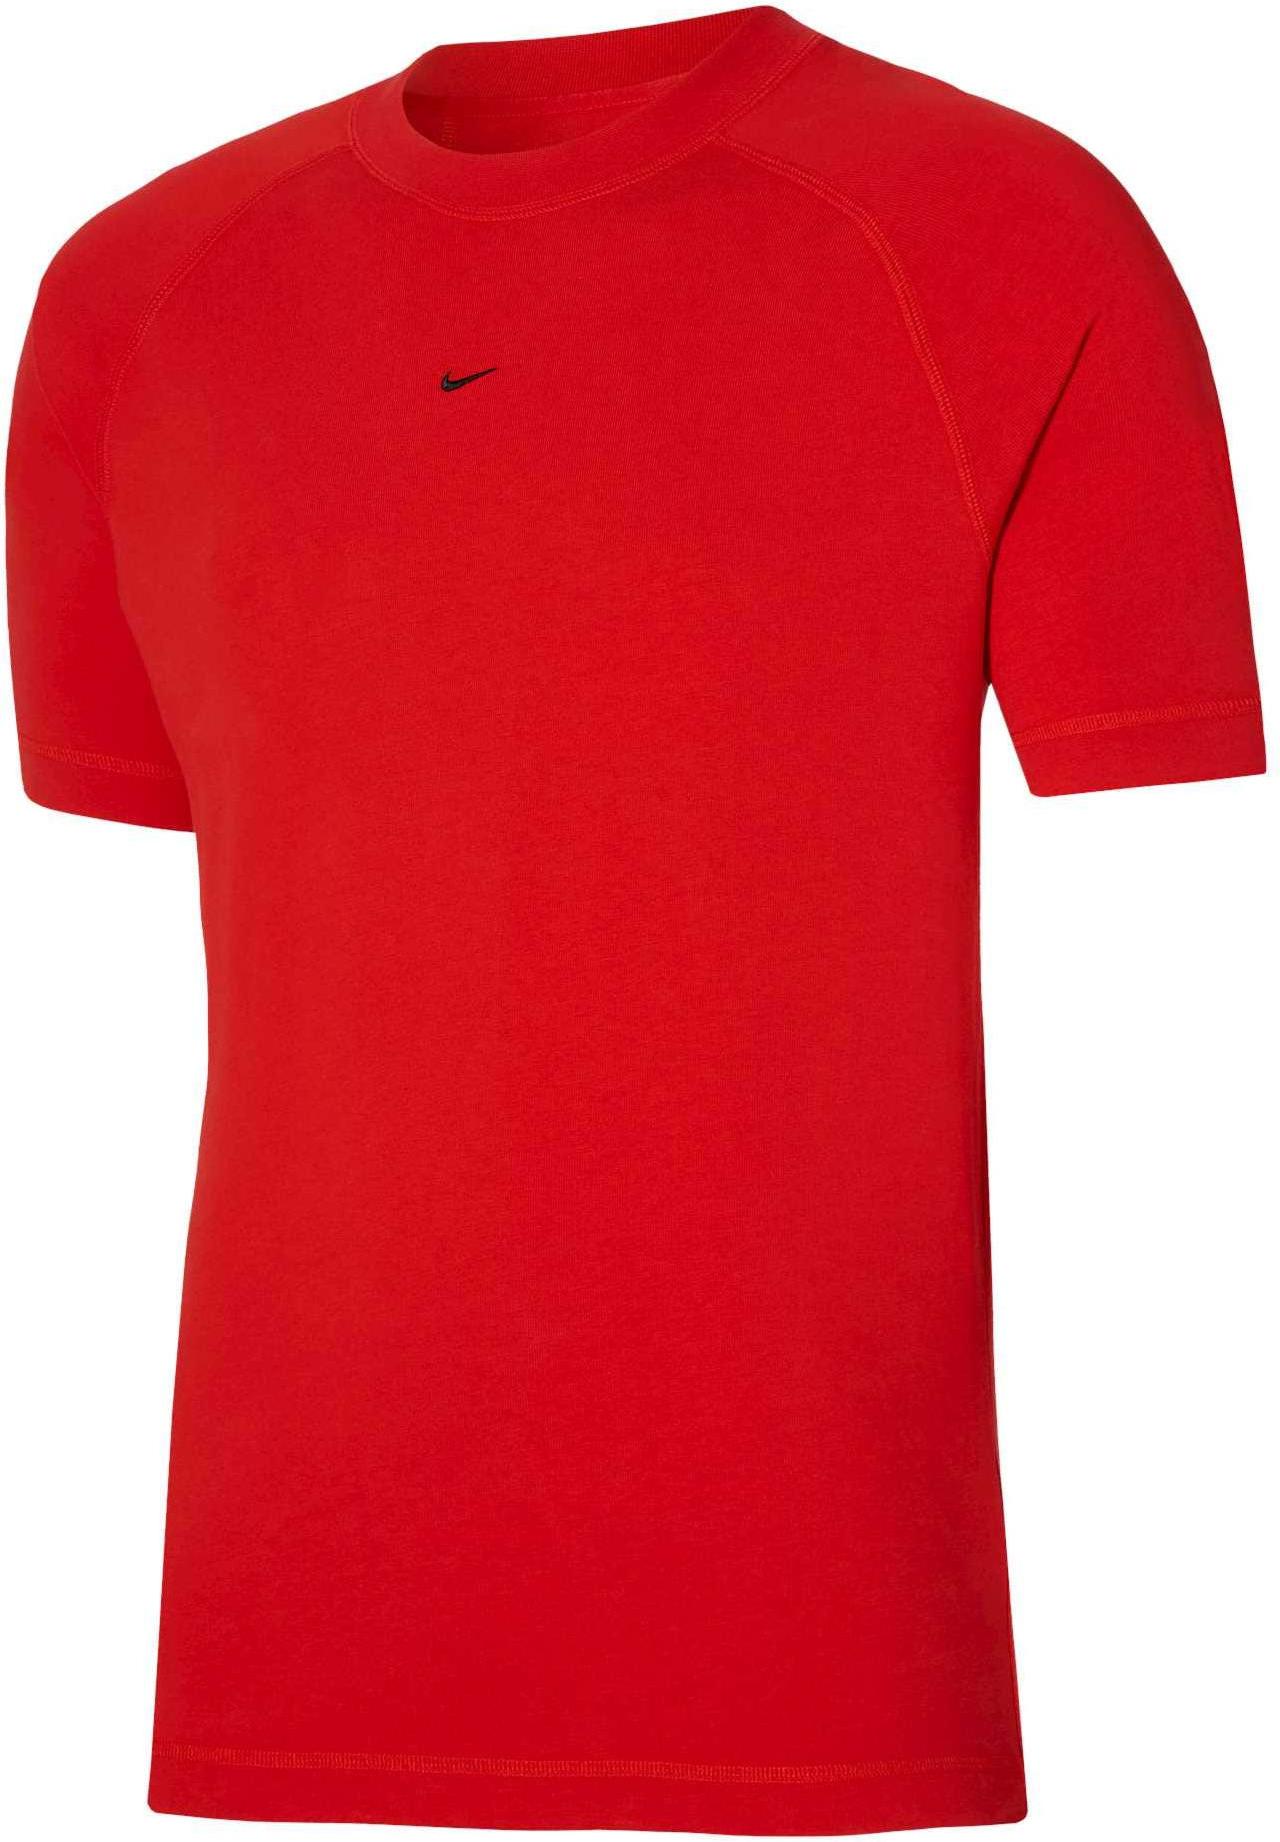 Nike spider strike 22 express top s s 423728 dh9361 657